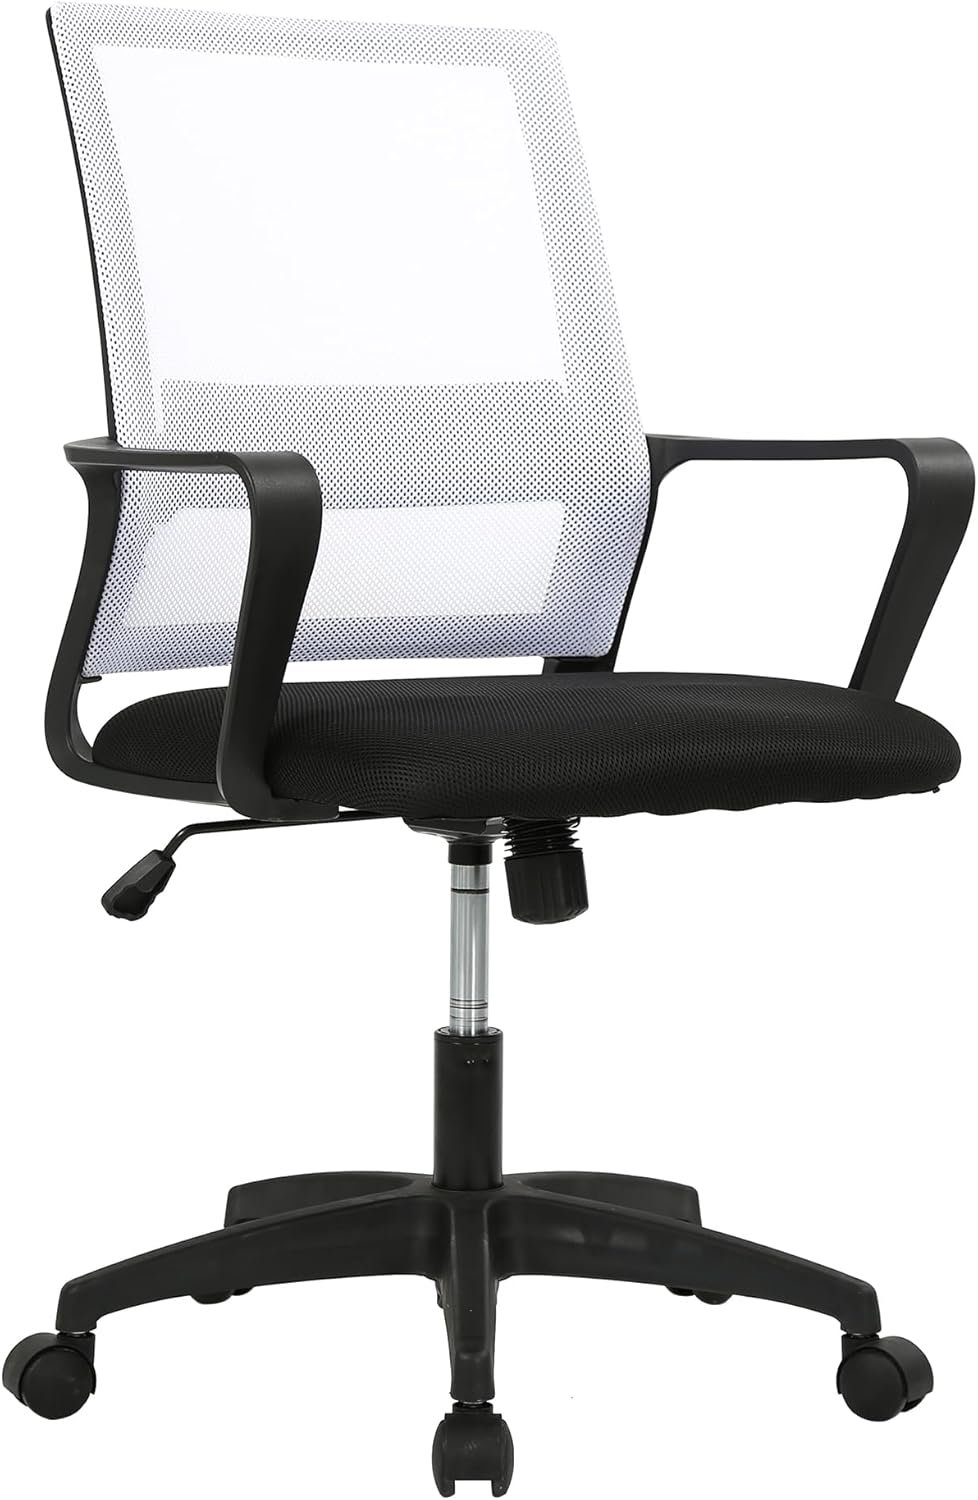 PayLessHere Office Chair Computer Chair Ergonomic Mesh Chair Mid-Back Home Office Swivel Chair Modern Desk Chair with Wheels Armrests Lumbar Support (White)